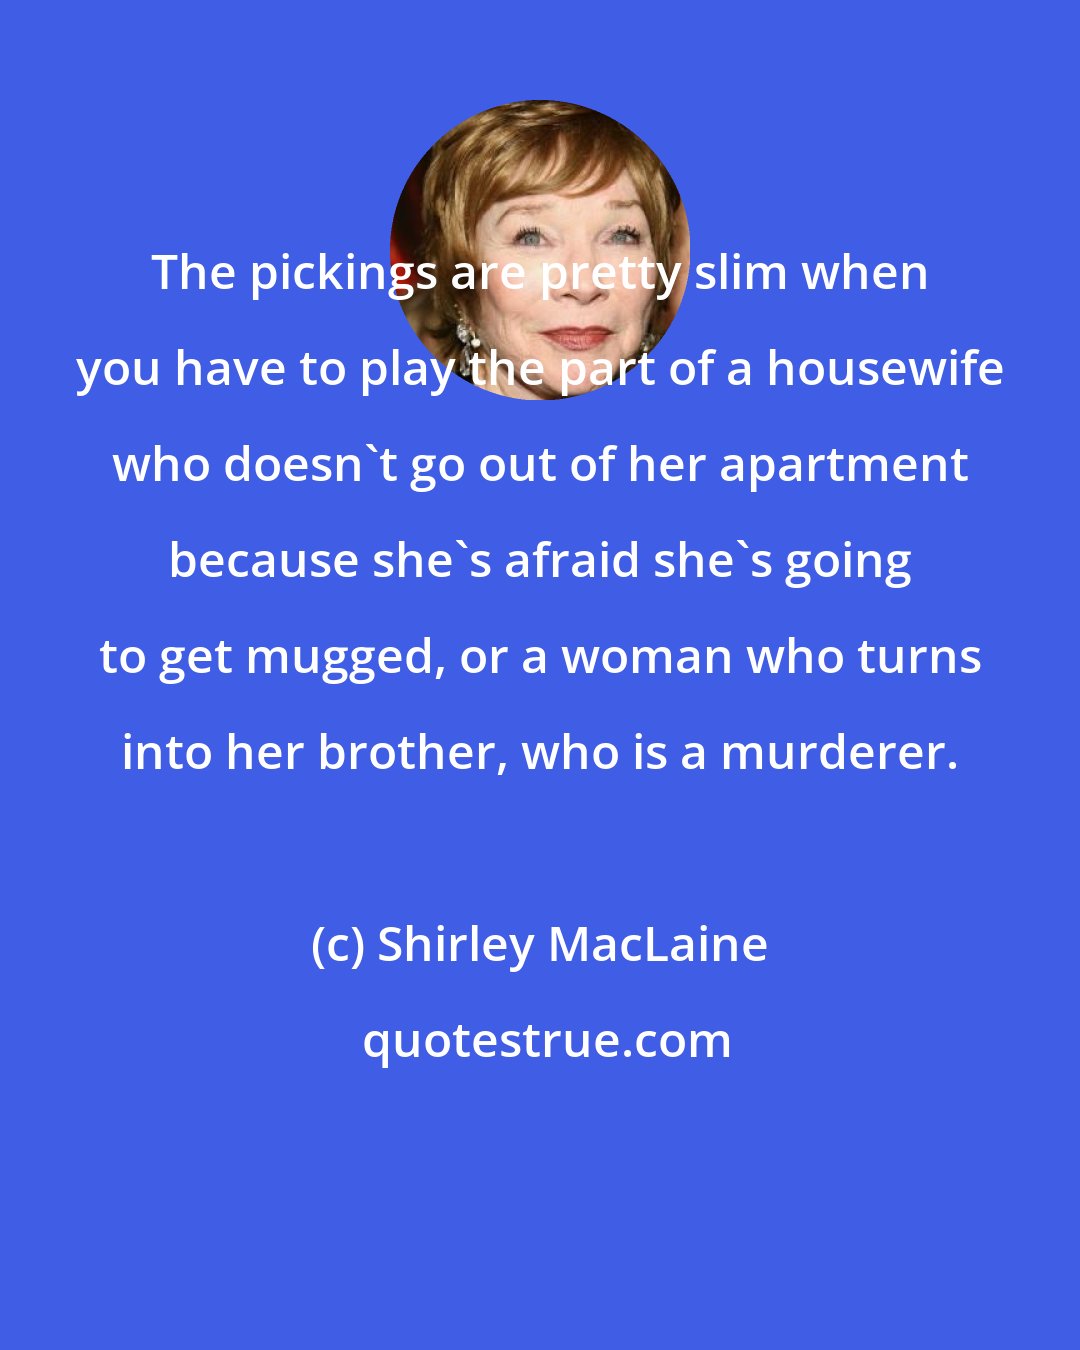 Shirley MacLaine: The pickings are pretty slim when you have to play the part of a housewife who doesn't go out of her apartment because she's afraid she's going to get mugged, or a woman who turns into her brother, who is a murderer.